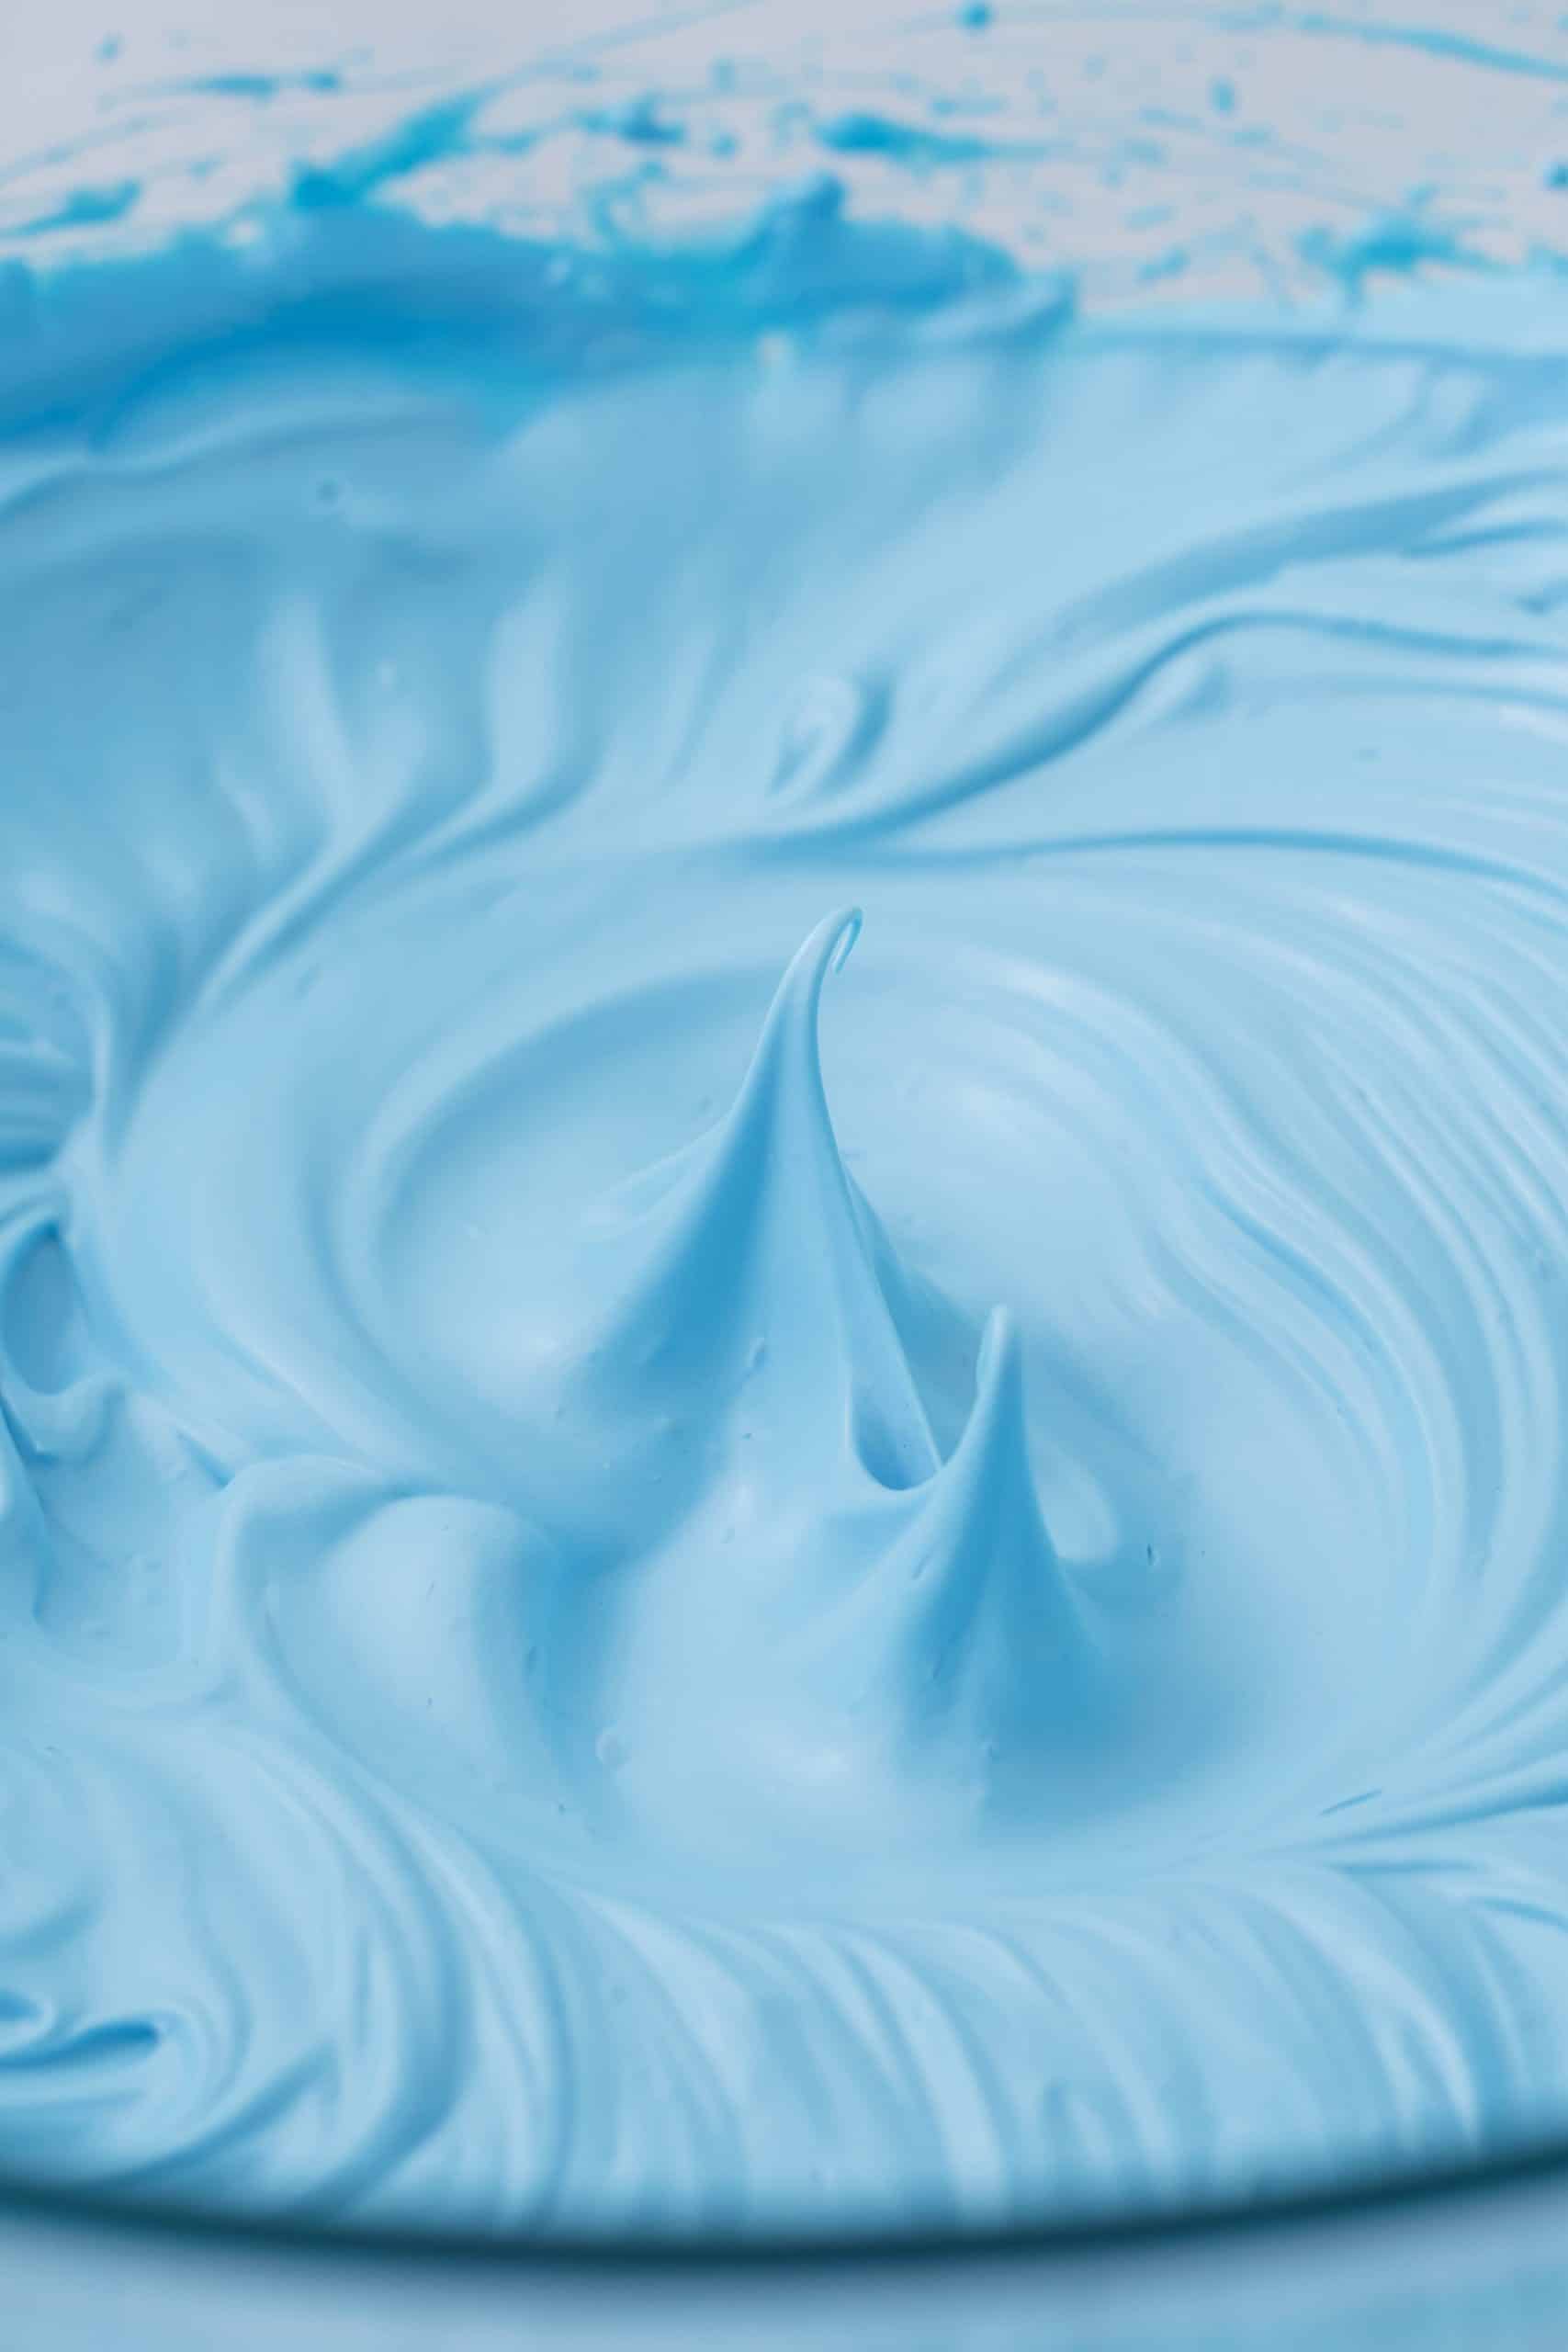 thick blue whipped egg whites in a clear bowl.